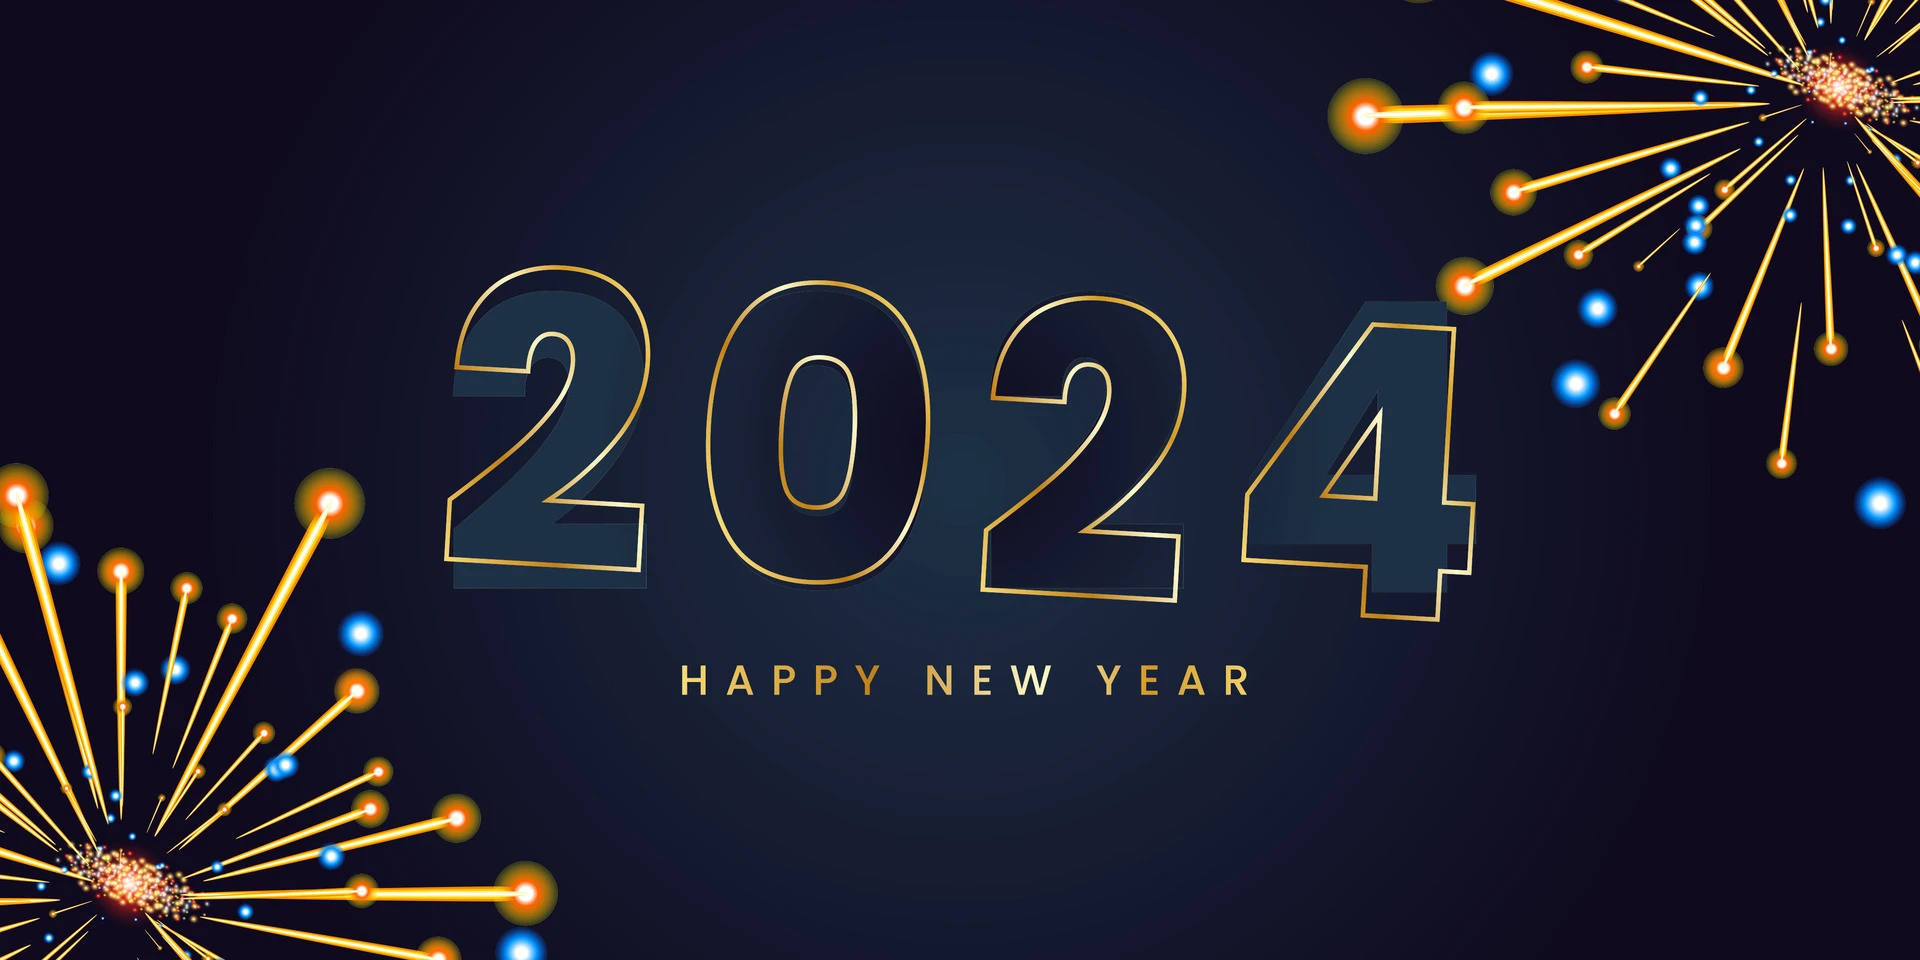 Happy new year 2024 with shiny gold numbers. Shiny gold 2024 new year greetings on black background